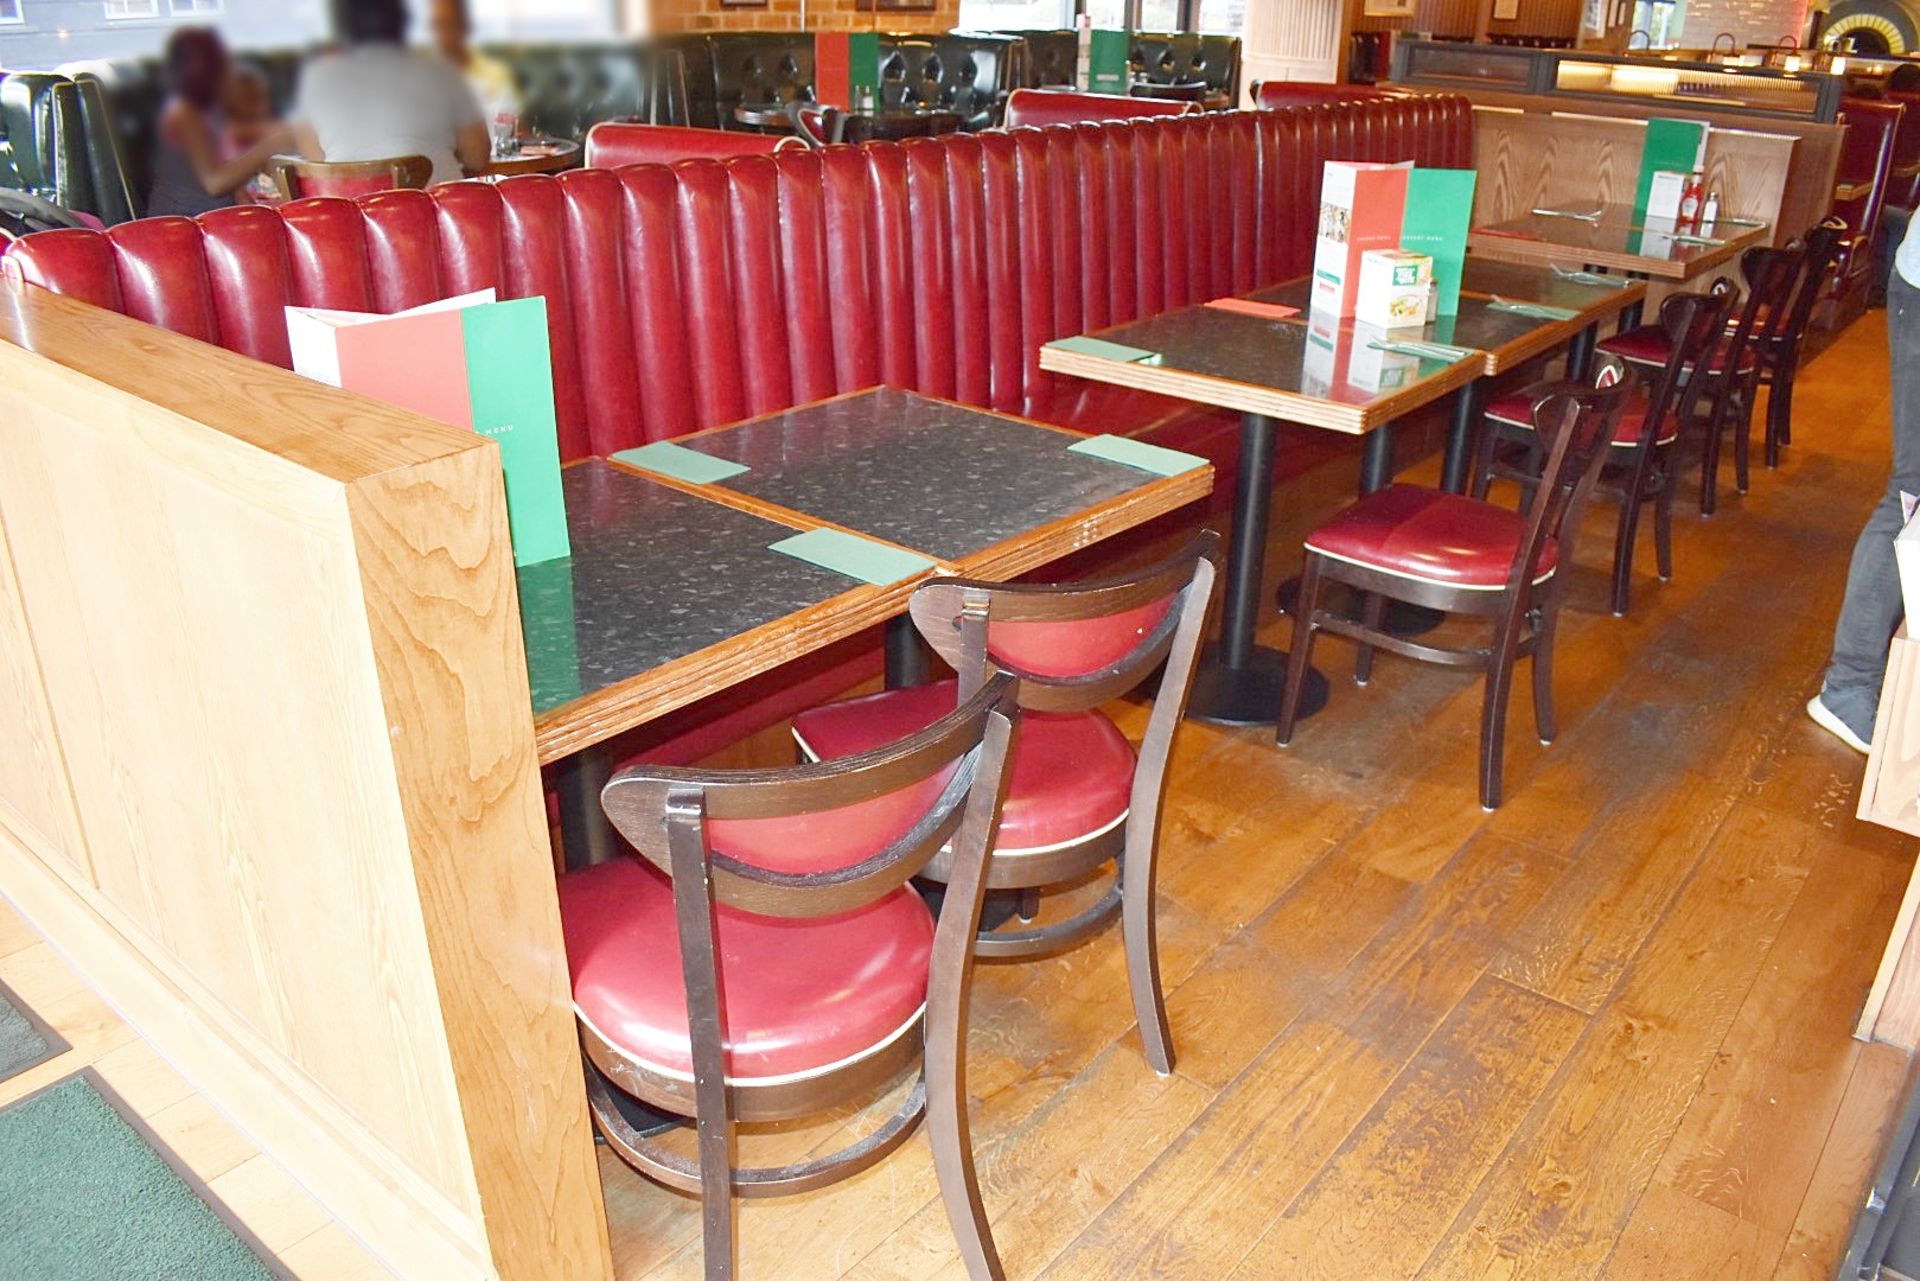 1 x Long Restaurant Seating Bench - Retro 1950s American Diner Design - Red Faux Leather - Image 3 of 5